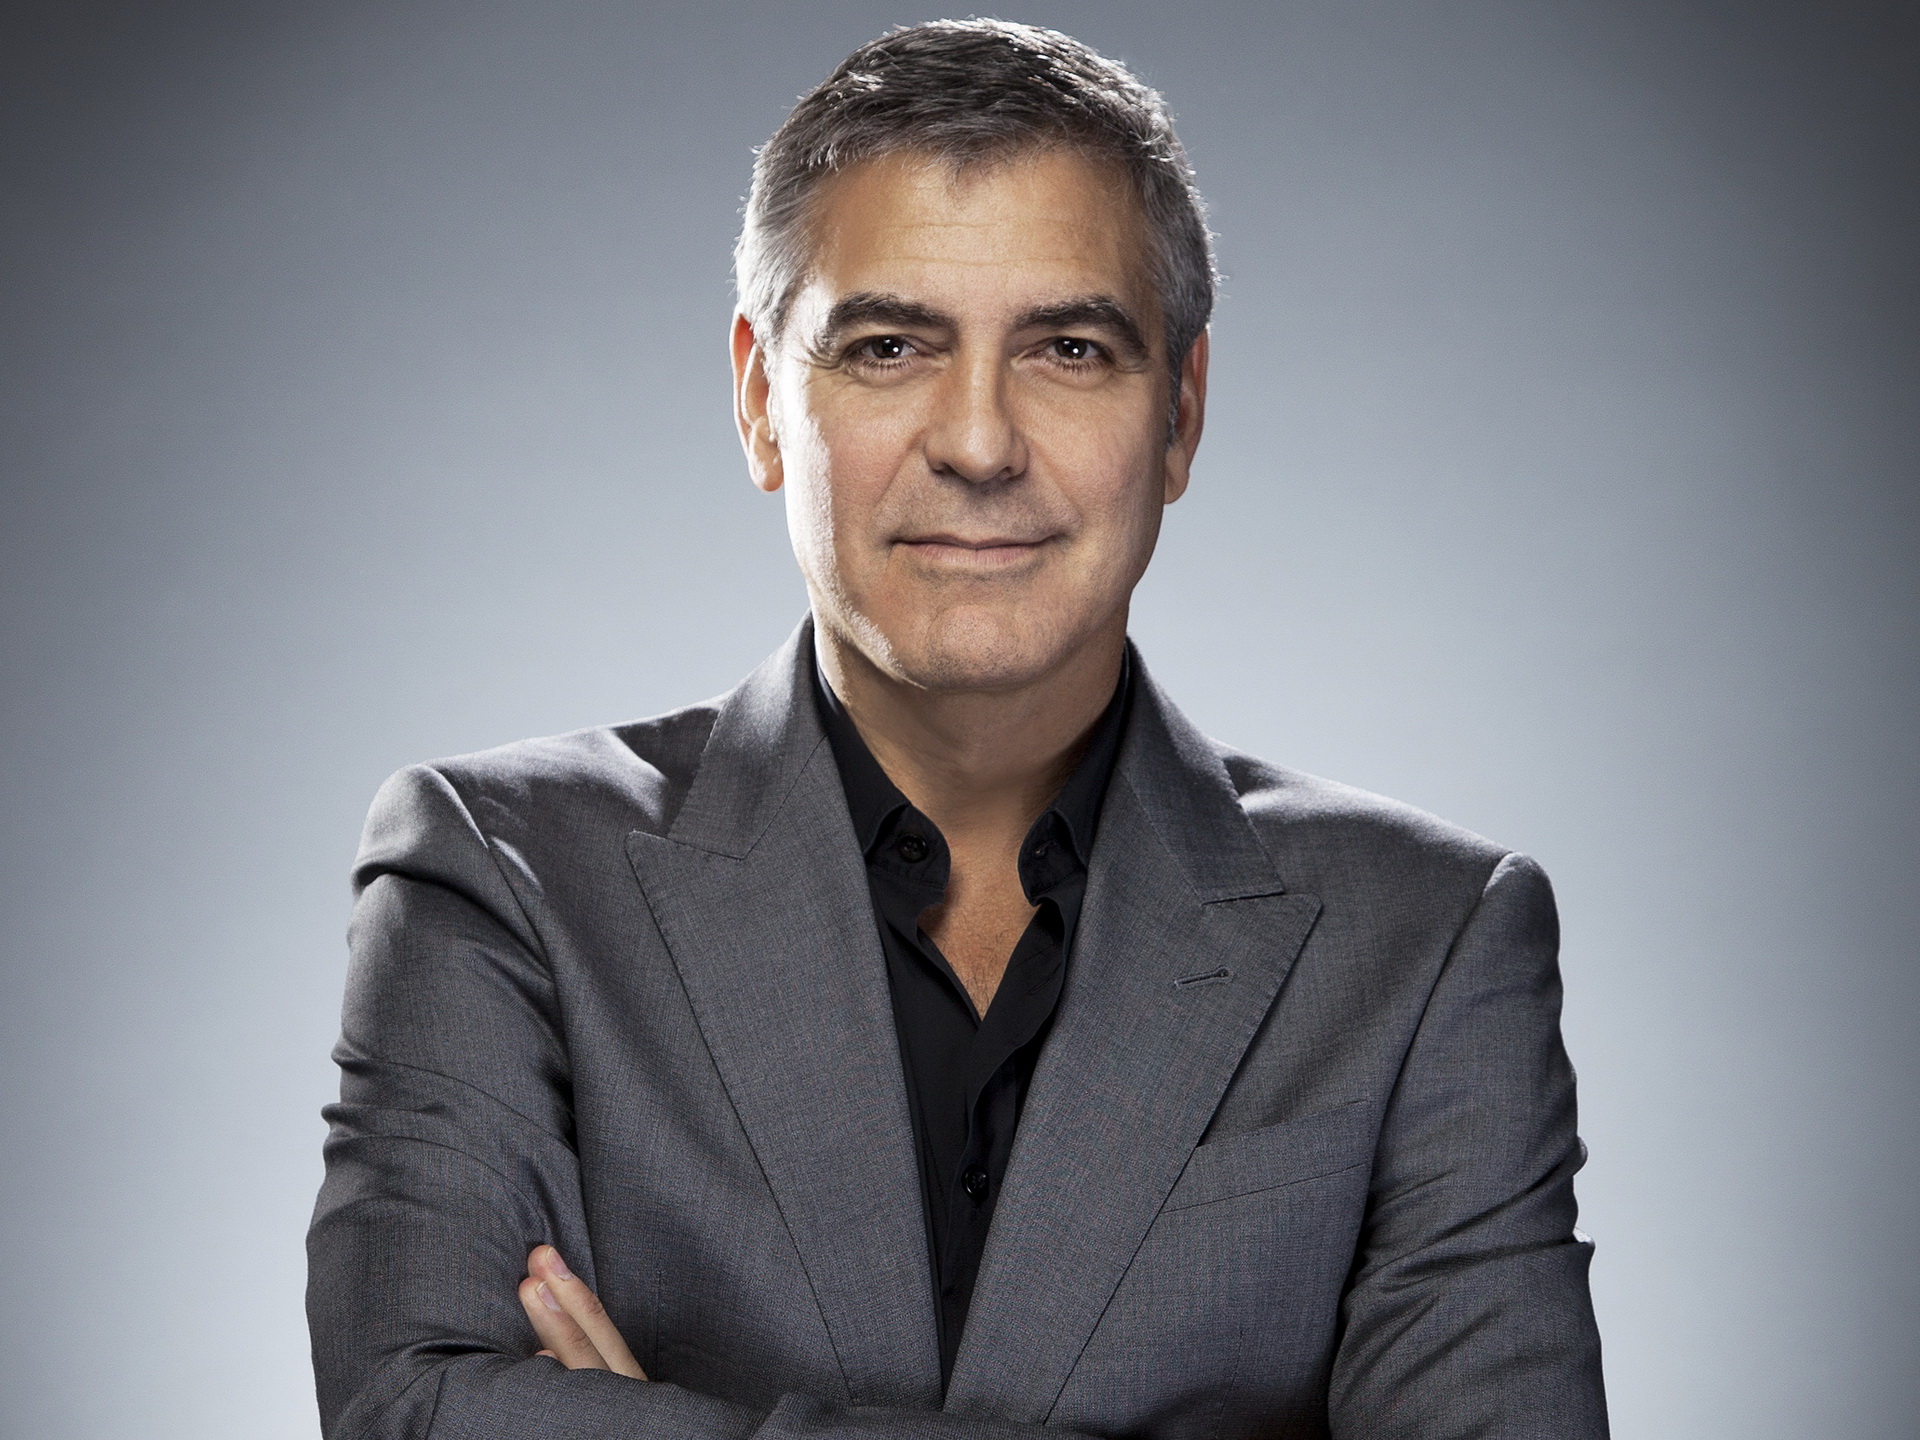 GEORGE CLOONEY 2011 Academy Award Nominee Actor in a Leading Role: THE DESCENDANTS Photographed by Douglas Kirkland on February 6, 2012